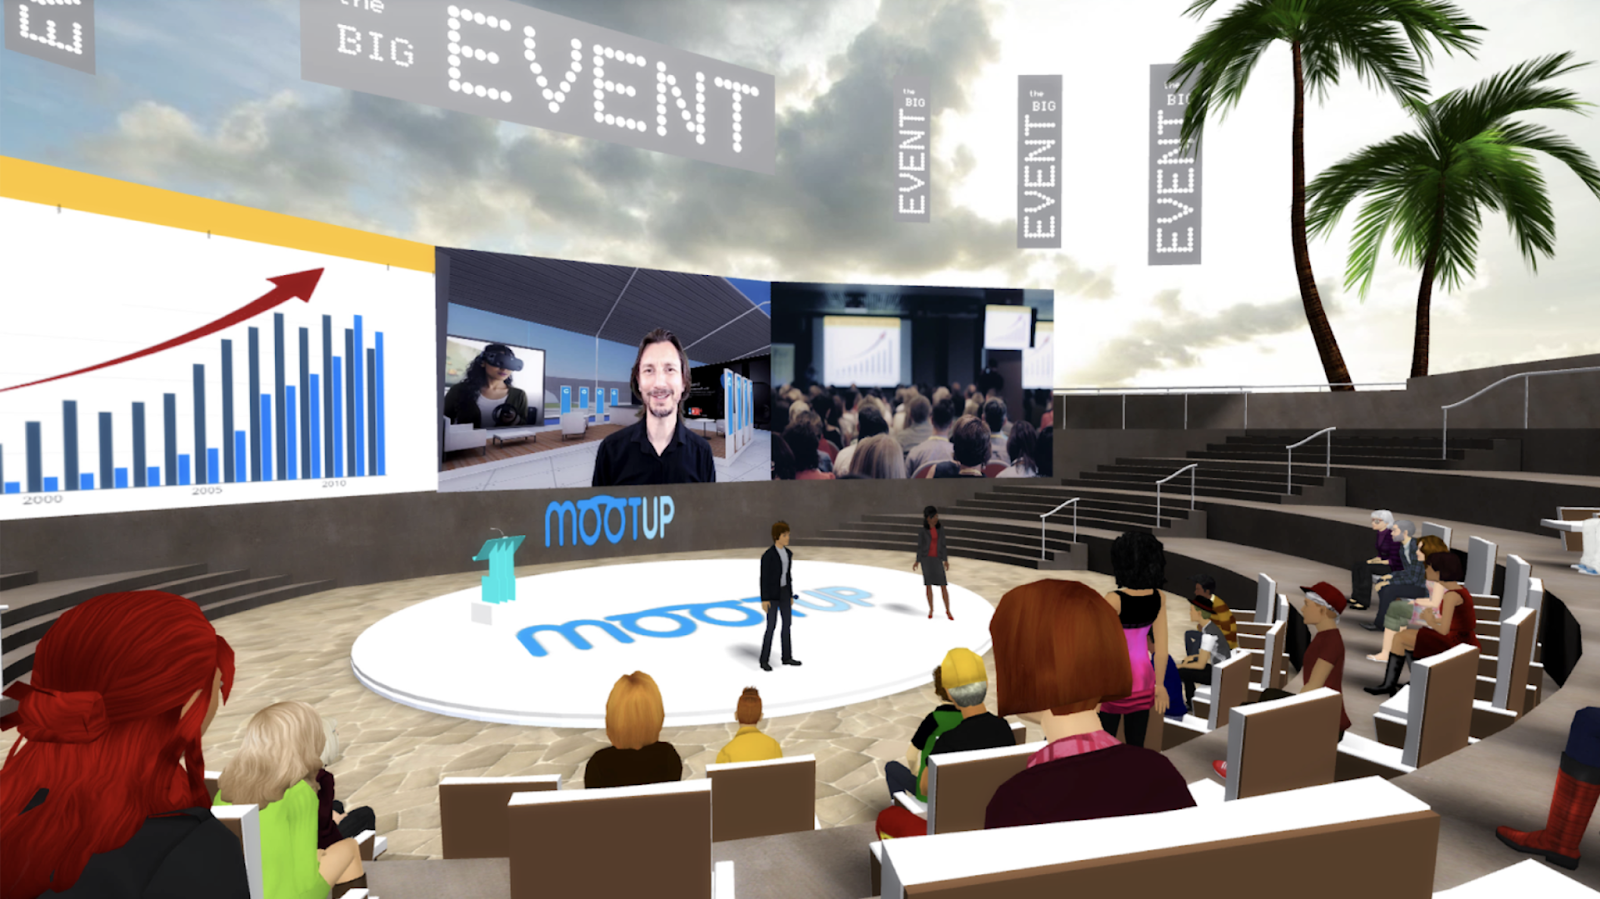 An event taking place inside a virtual environment.